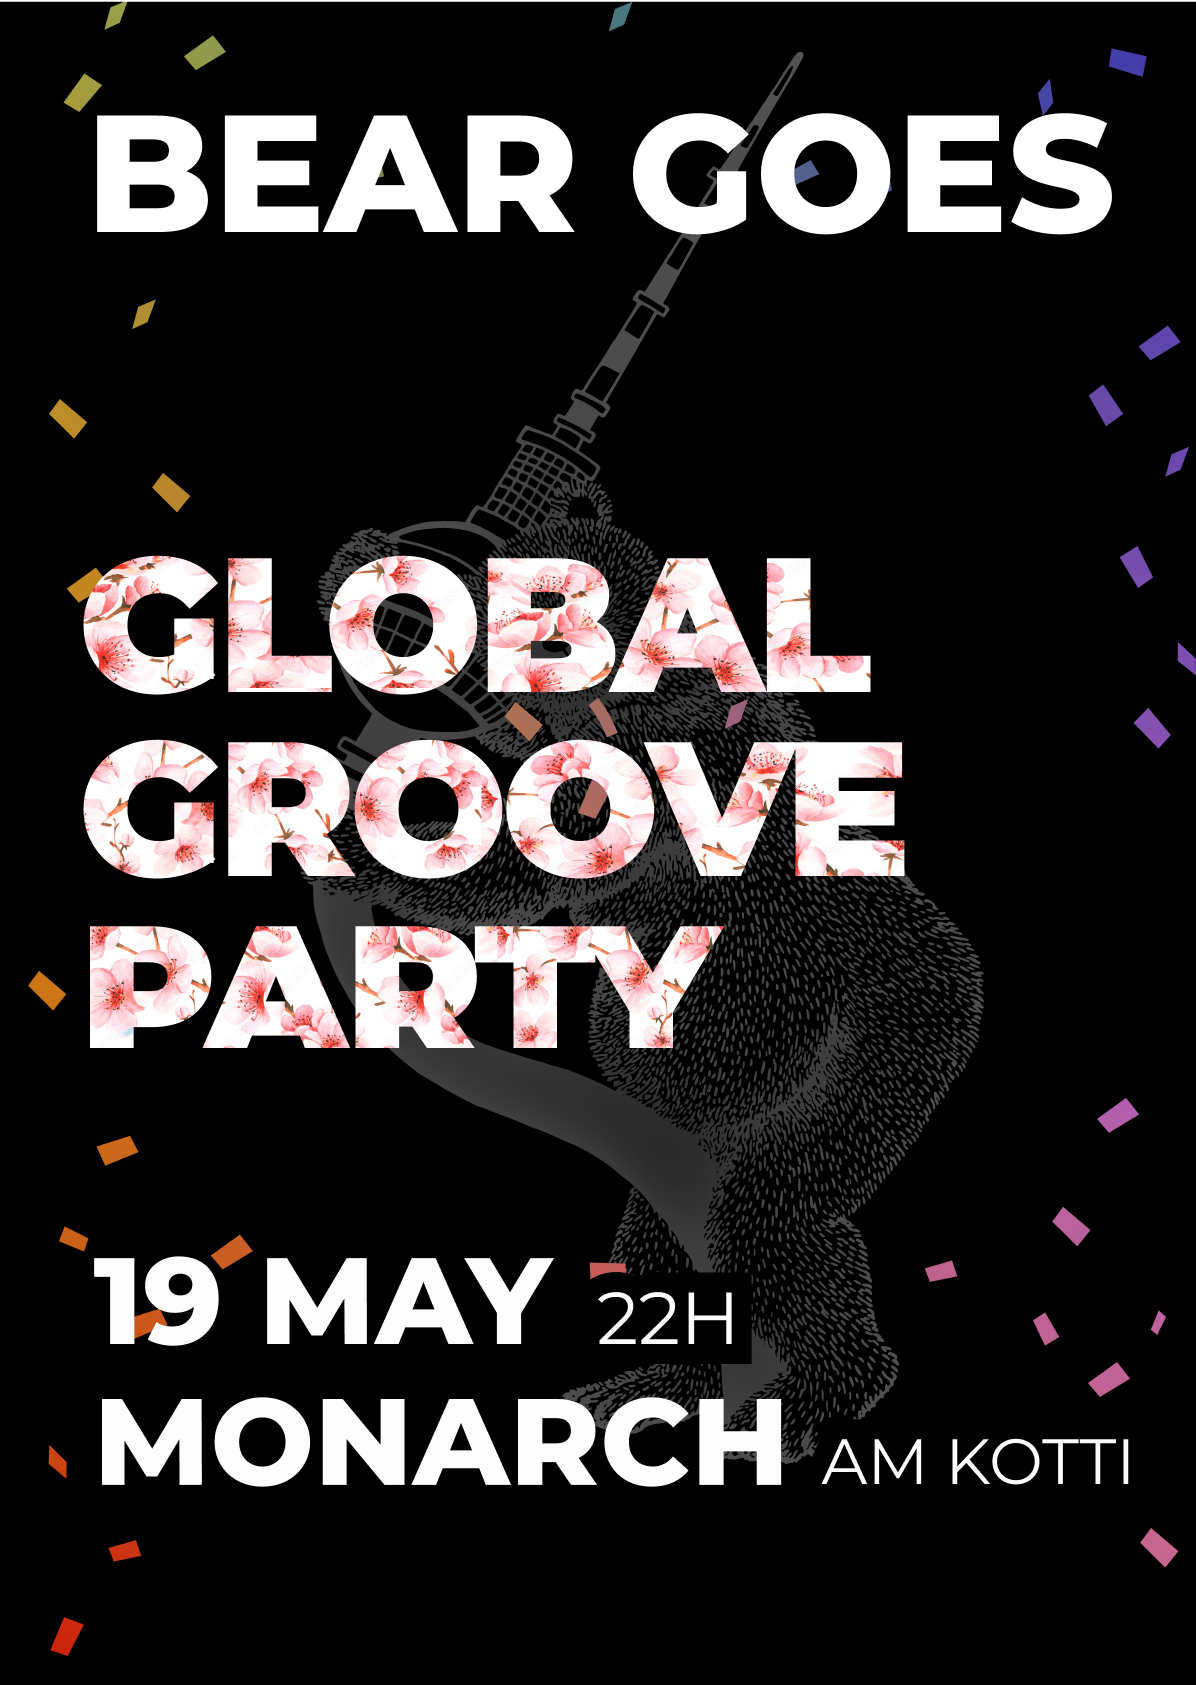 Bear goes Global Groove Party - フライヤー表